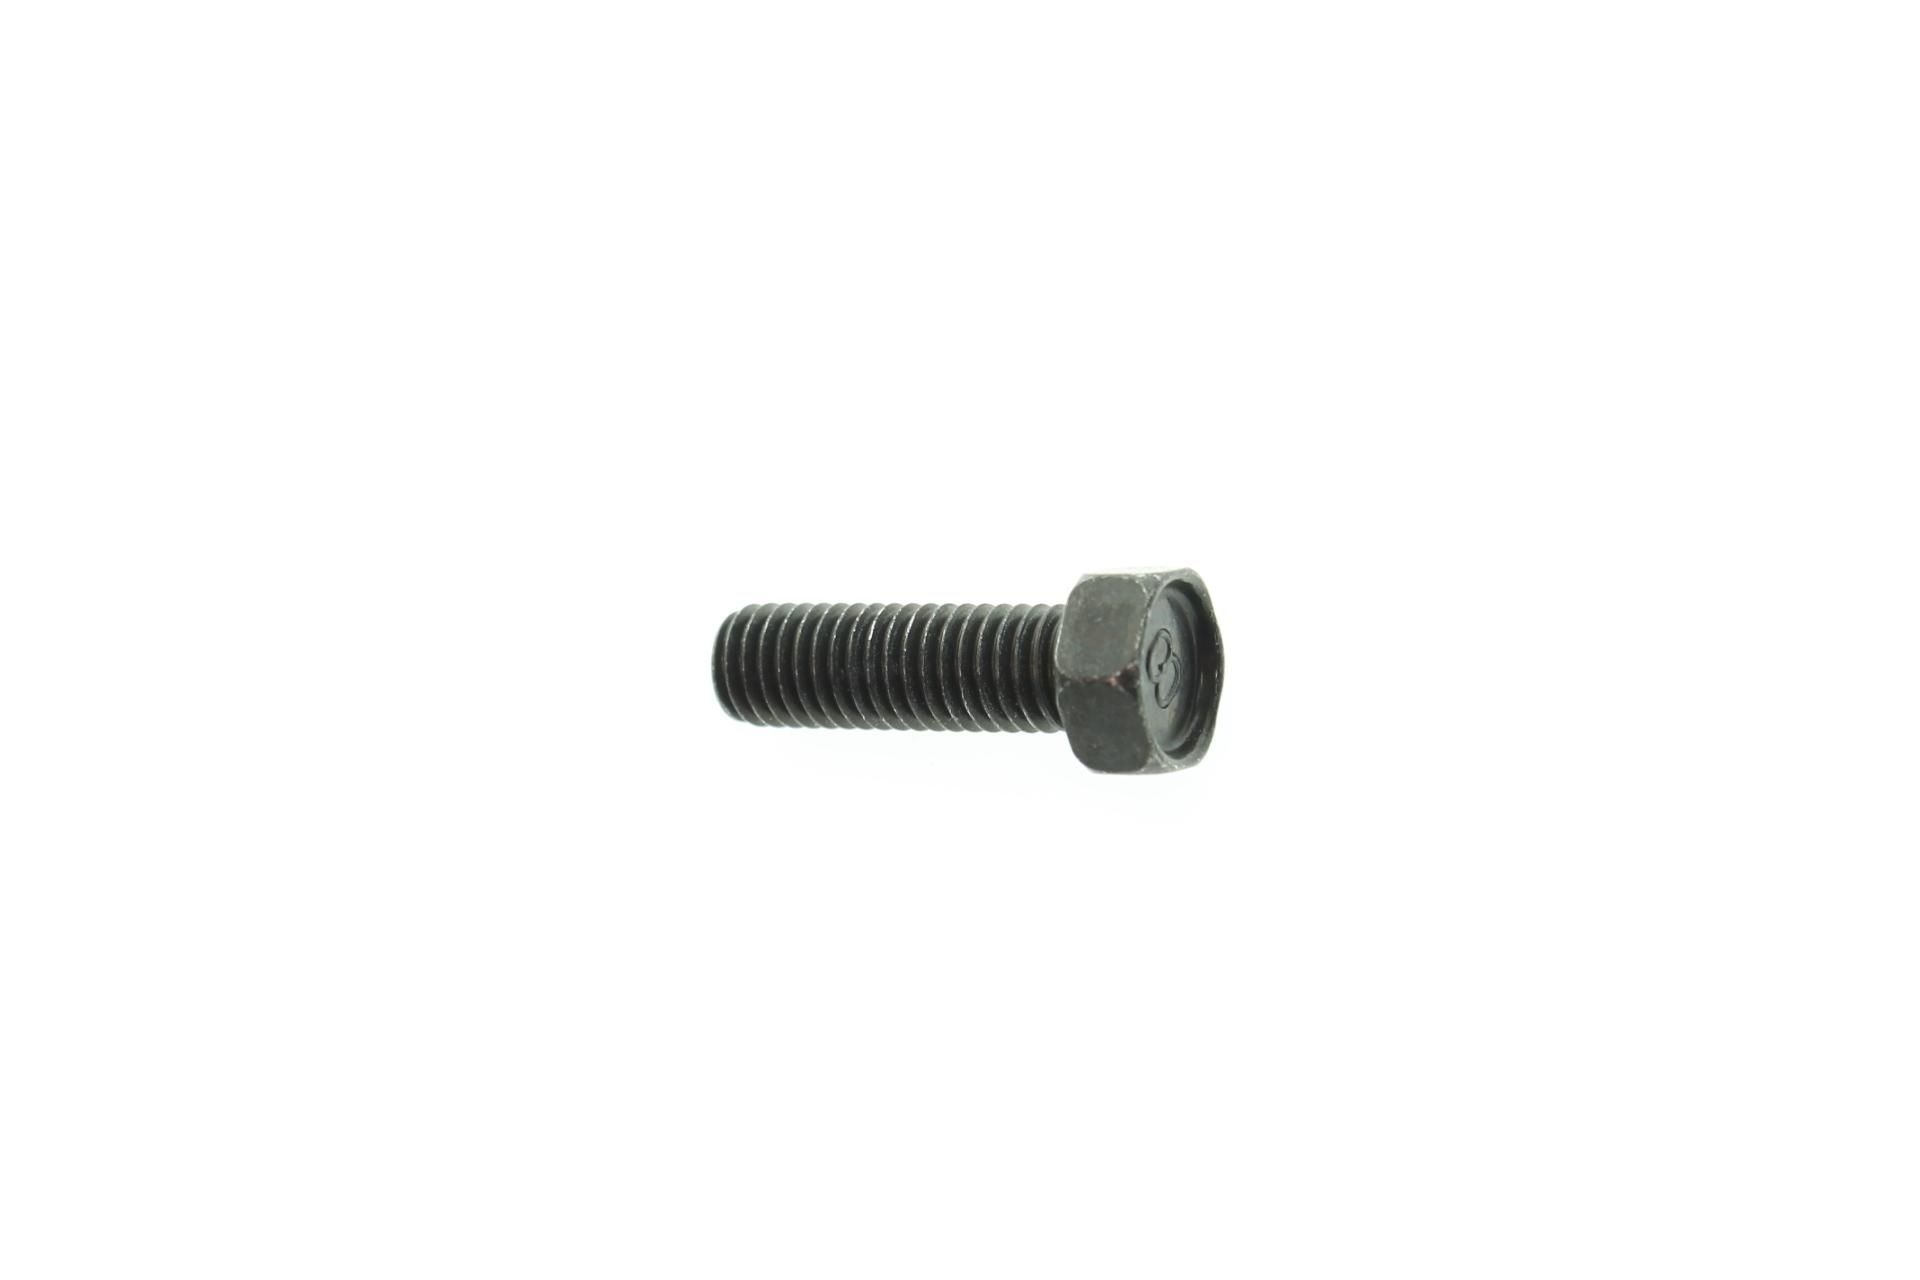 91201-08025-00 Superseded by 97017-08025-00 - BOLT